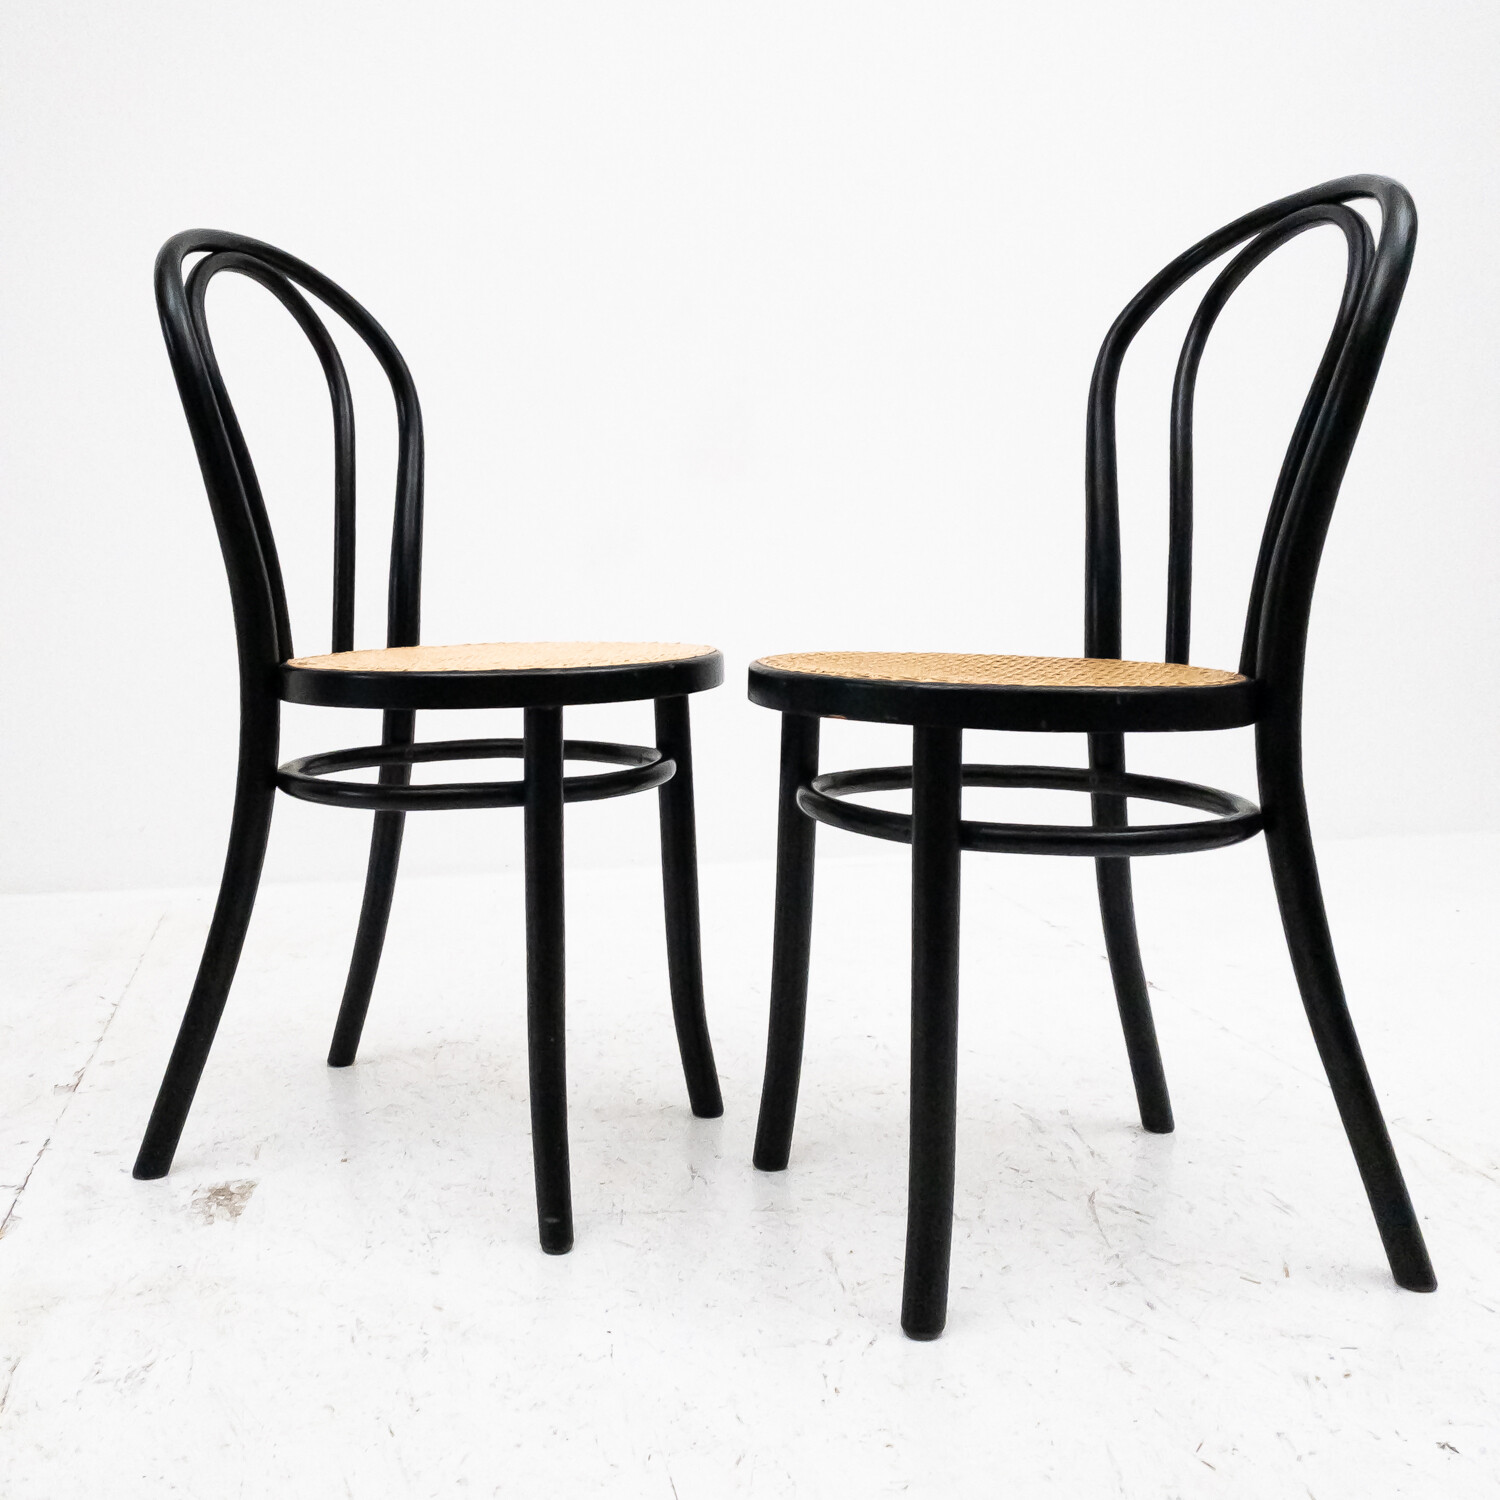 Set of 2 chairs n. 14 in Thonet style